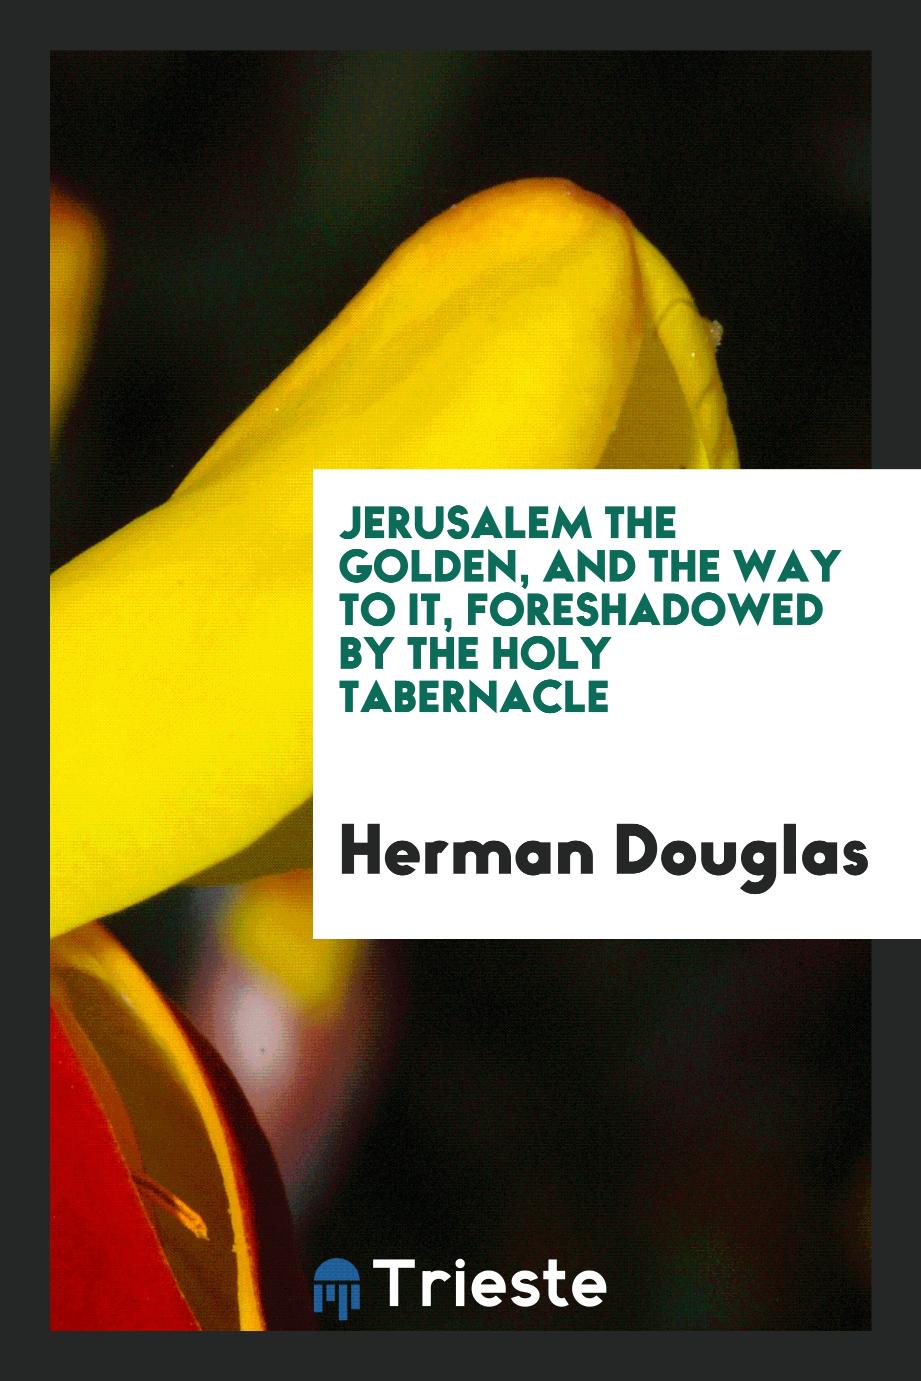 Jerusalem the Golden, and the Way to It, Foreshadowed by the Holy Tabernacle